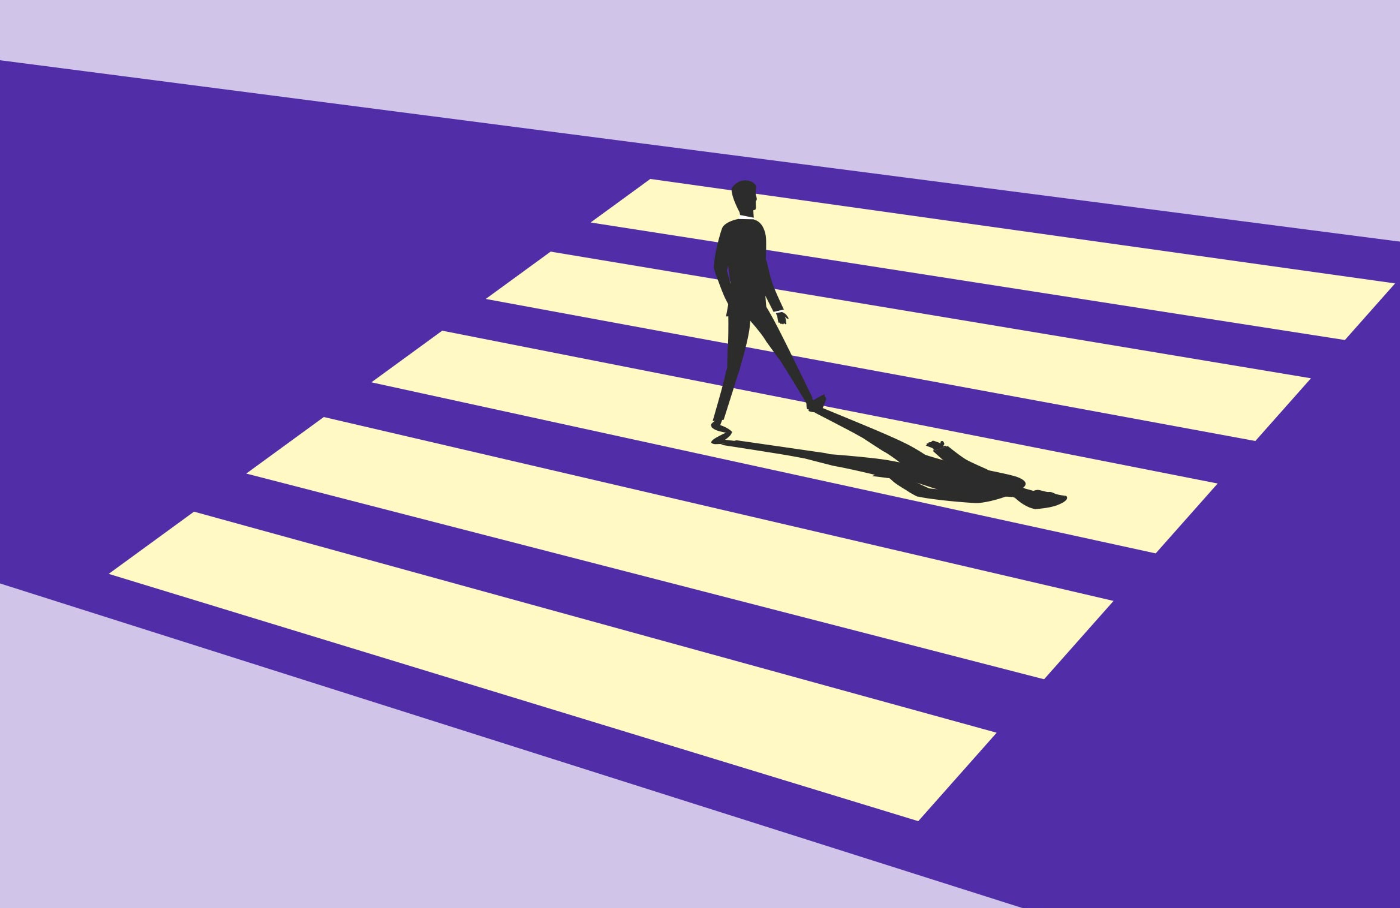 An image showing a person on a zebra crossing in the tinkr brand colours.